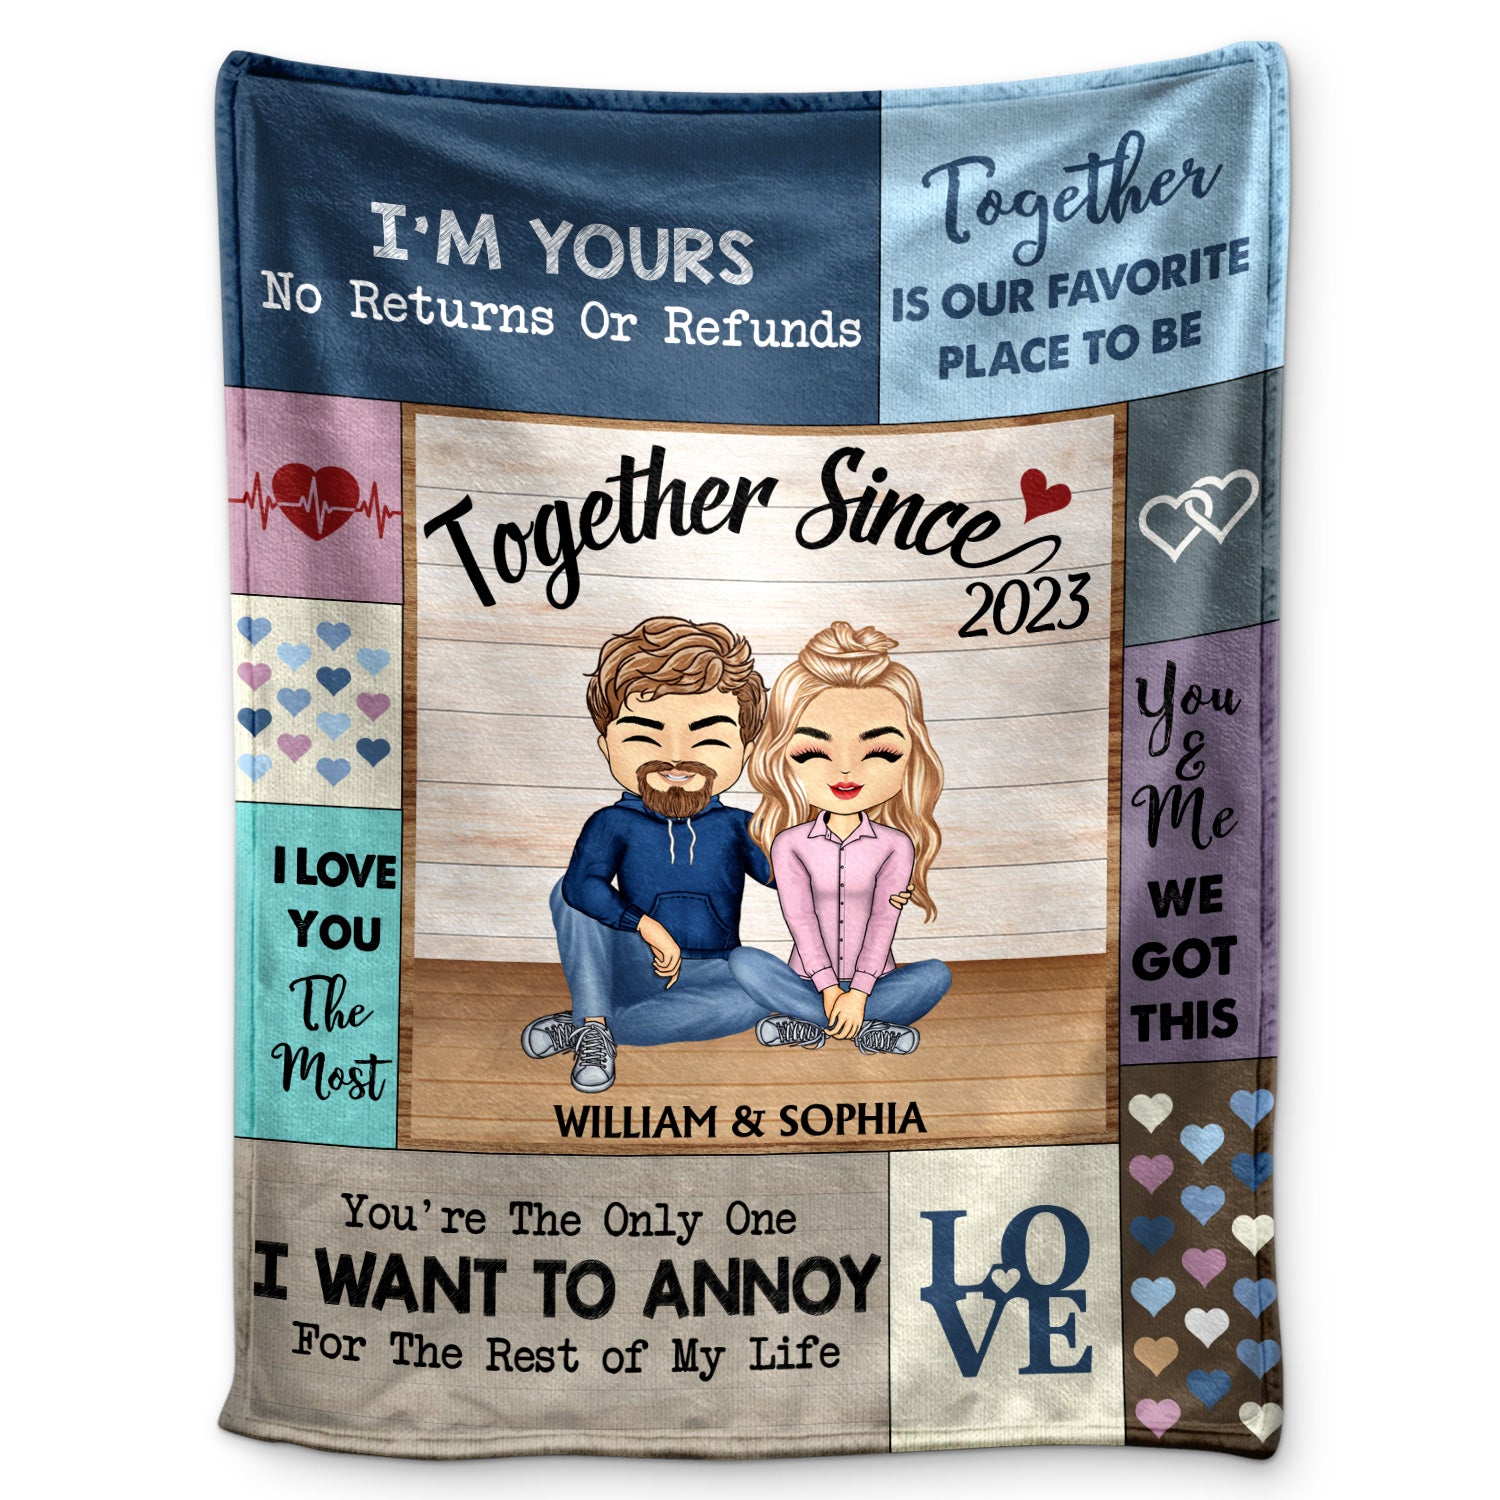 I Love You The Most Together Since Couple - Anniversary, Birthday Gift For Spouse, Husband, Wife, Boyfriend, Girlfriend - Personalized Custom Fleece Blanket